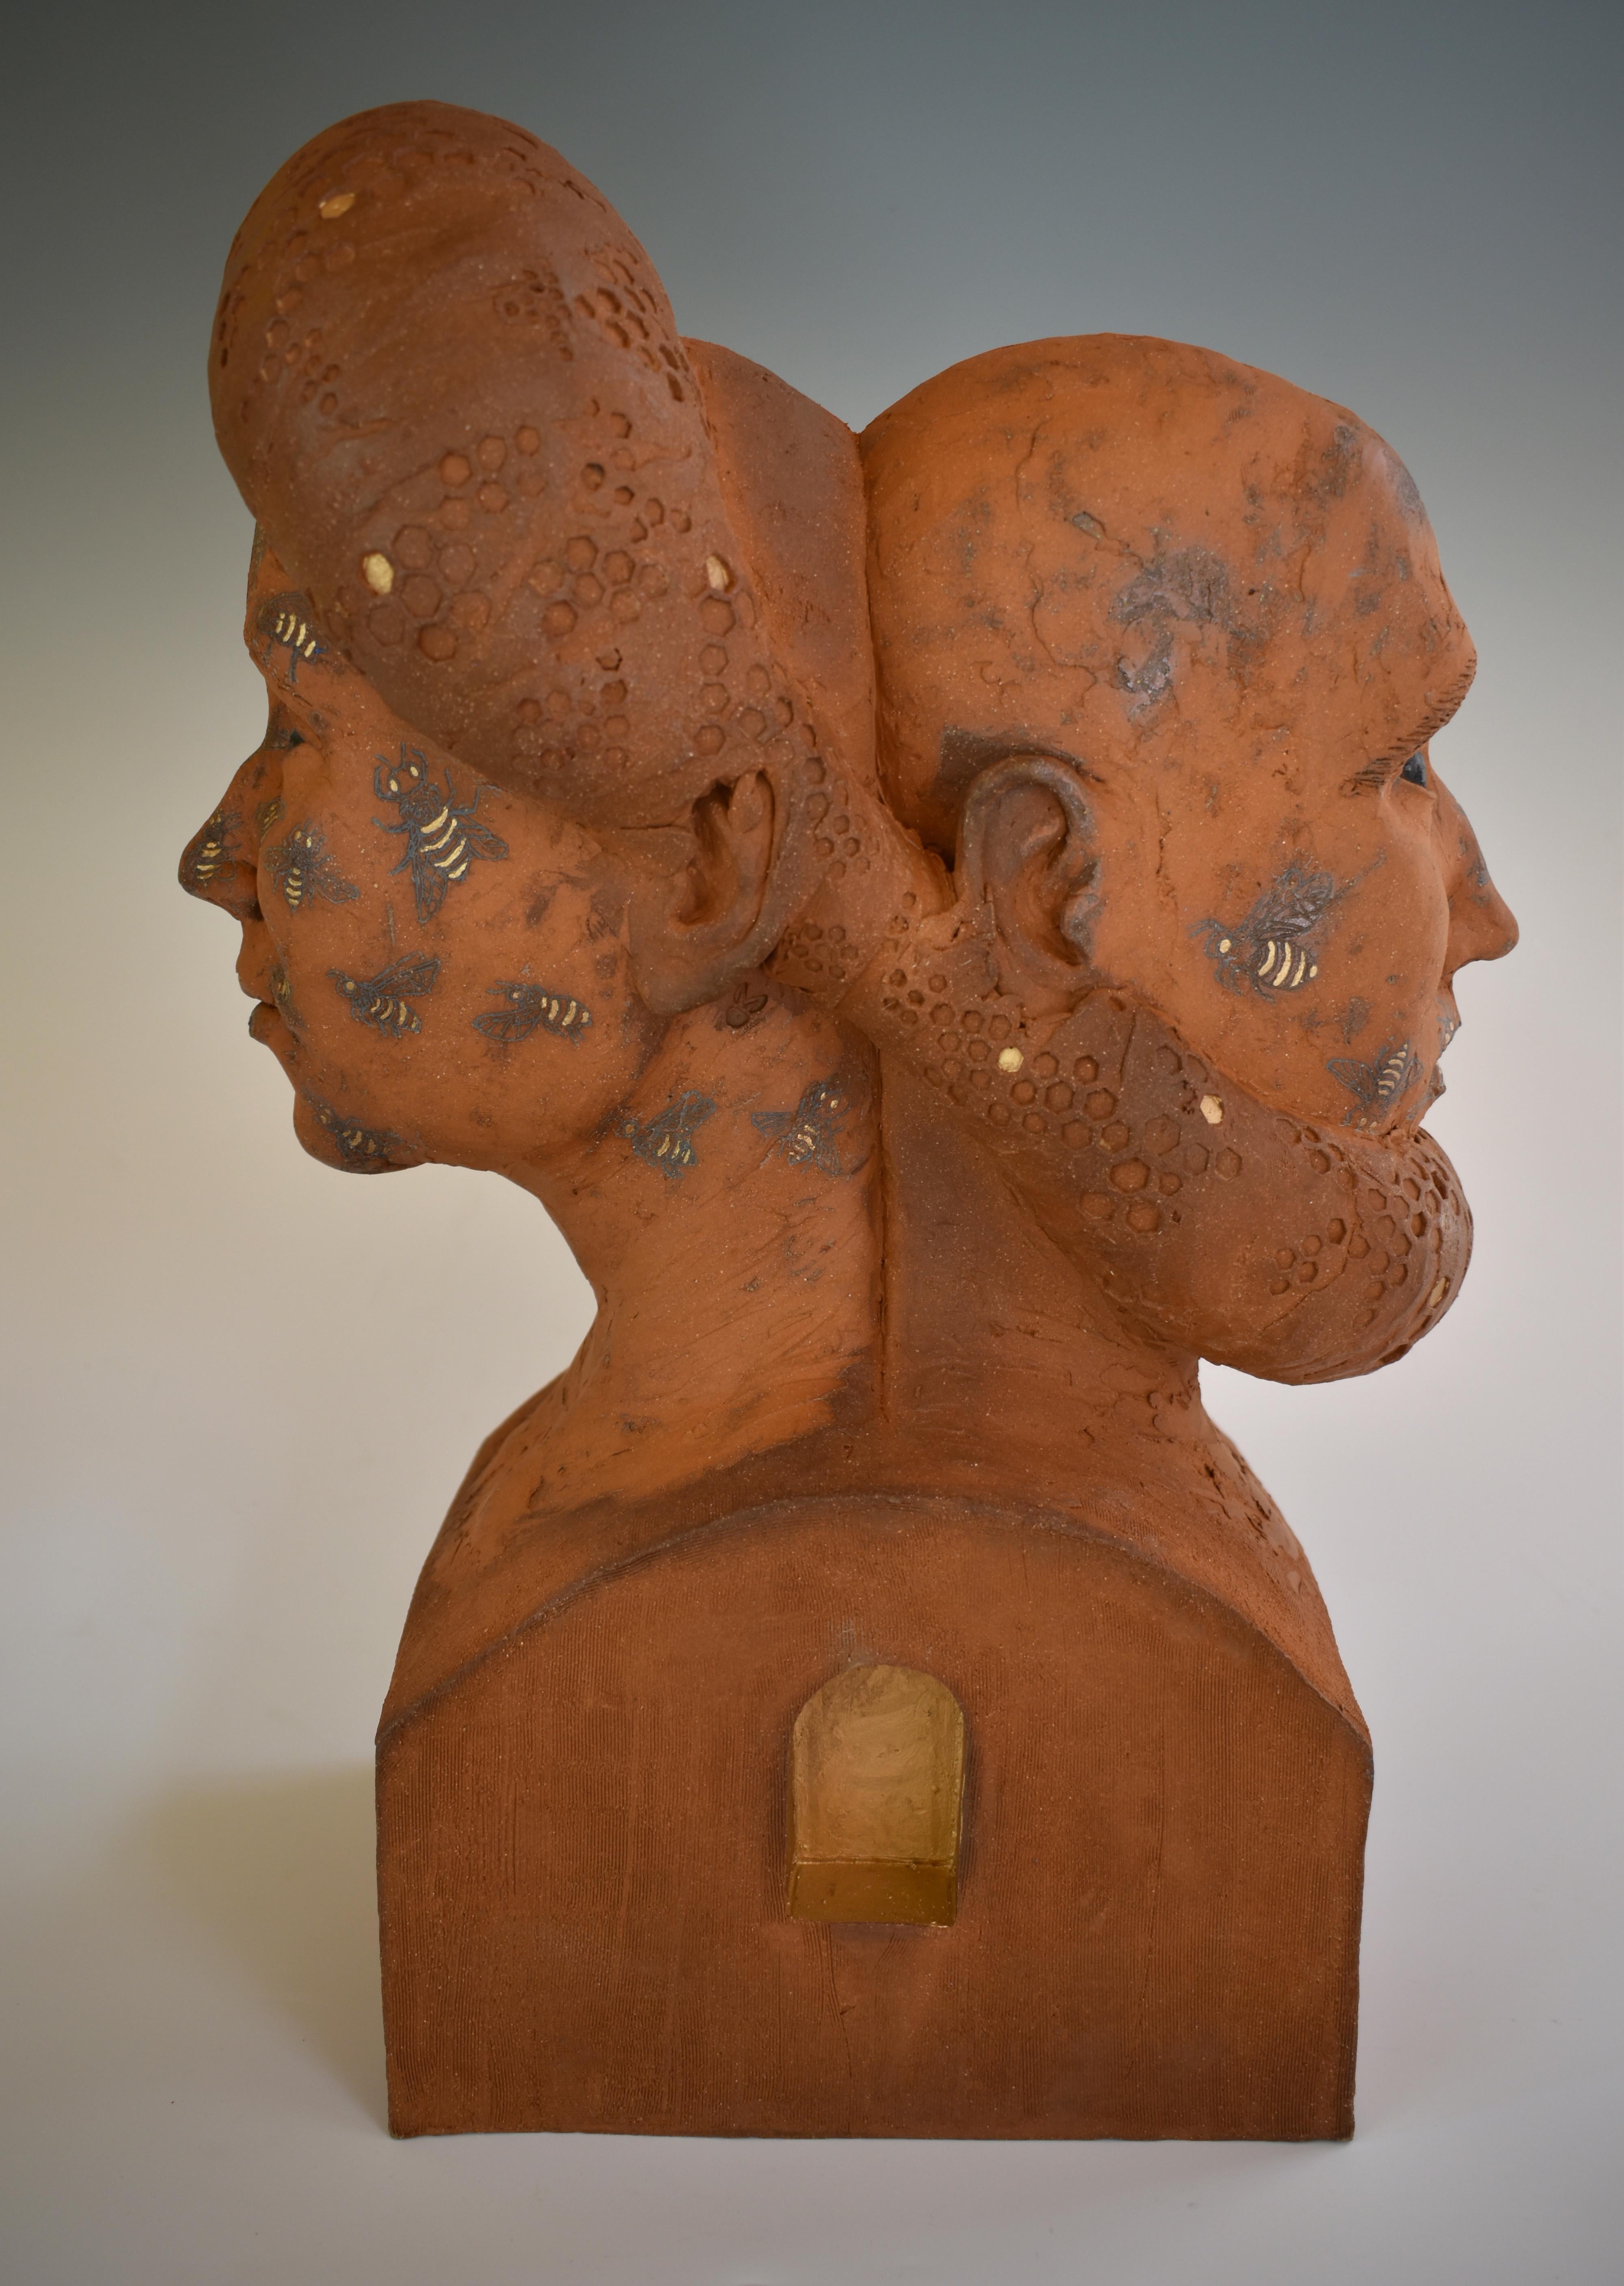 Magda Gluszek Figurative Sculpture - WE'RE (ALWAYS) IN THIS TOGETHER - surreal ceramic sculpture of man and woman